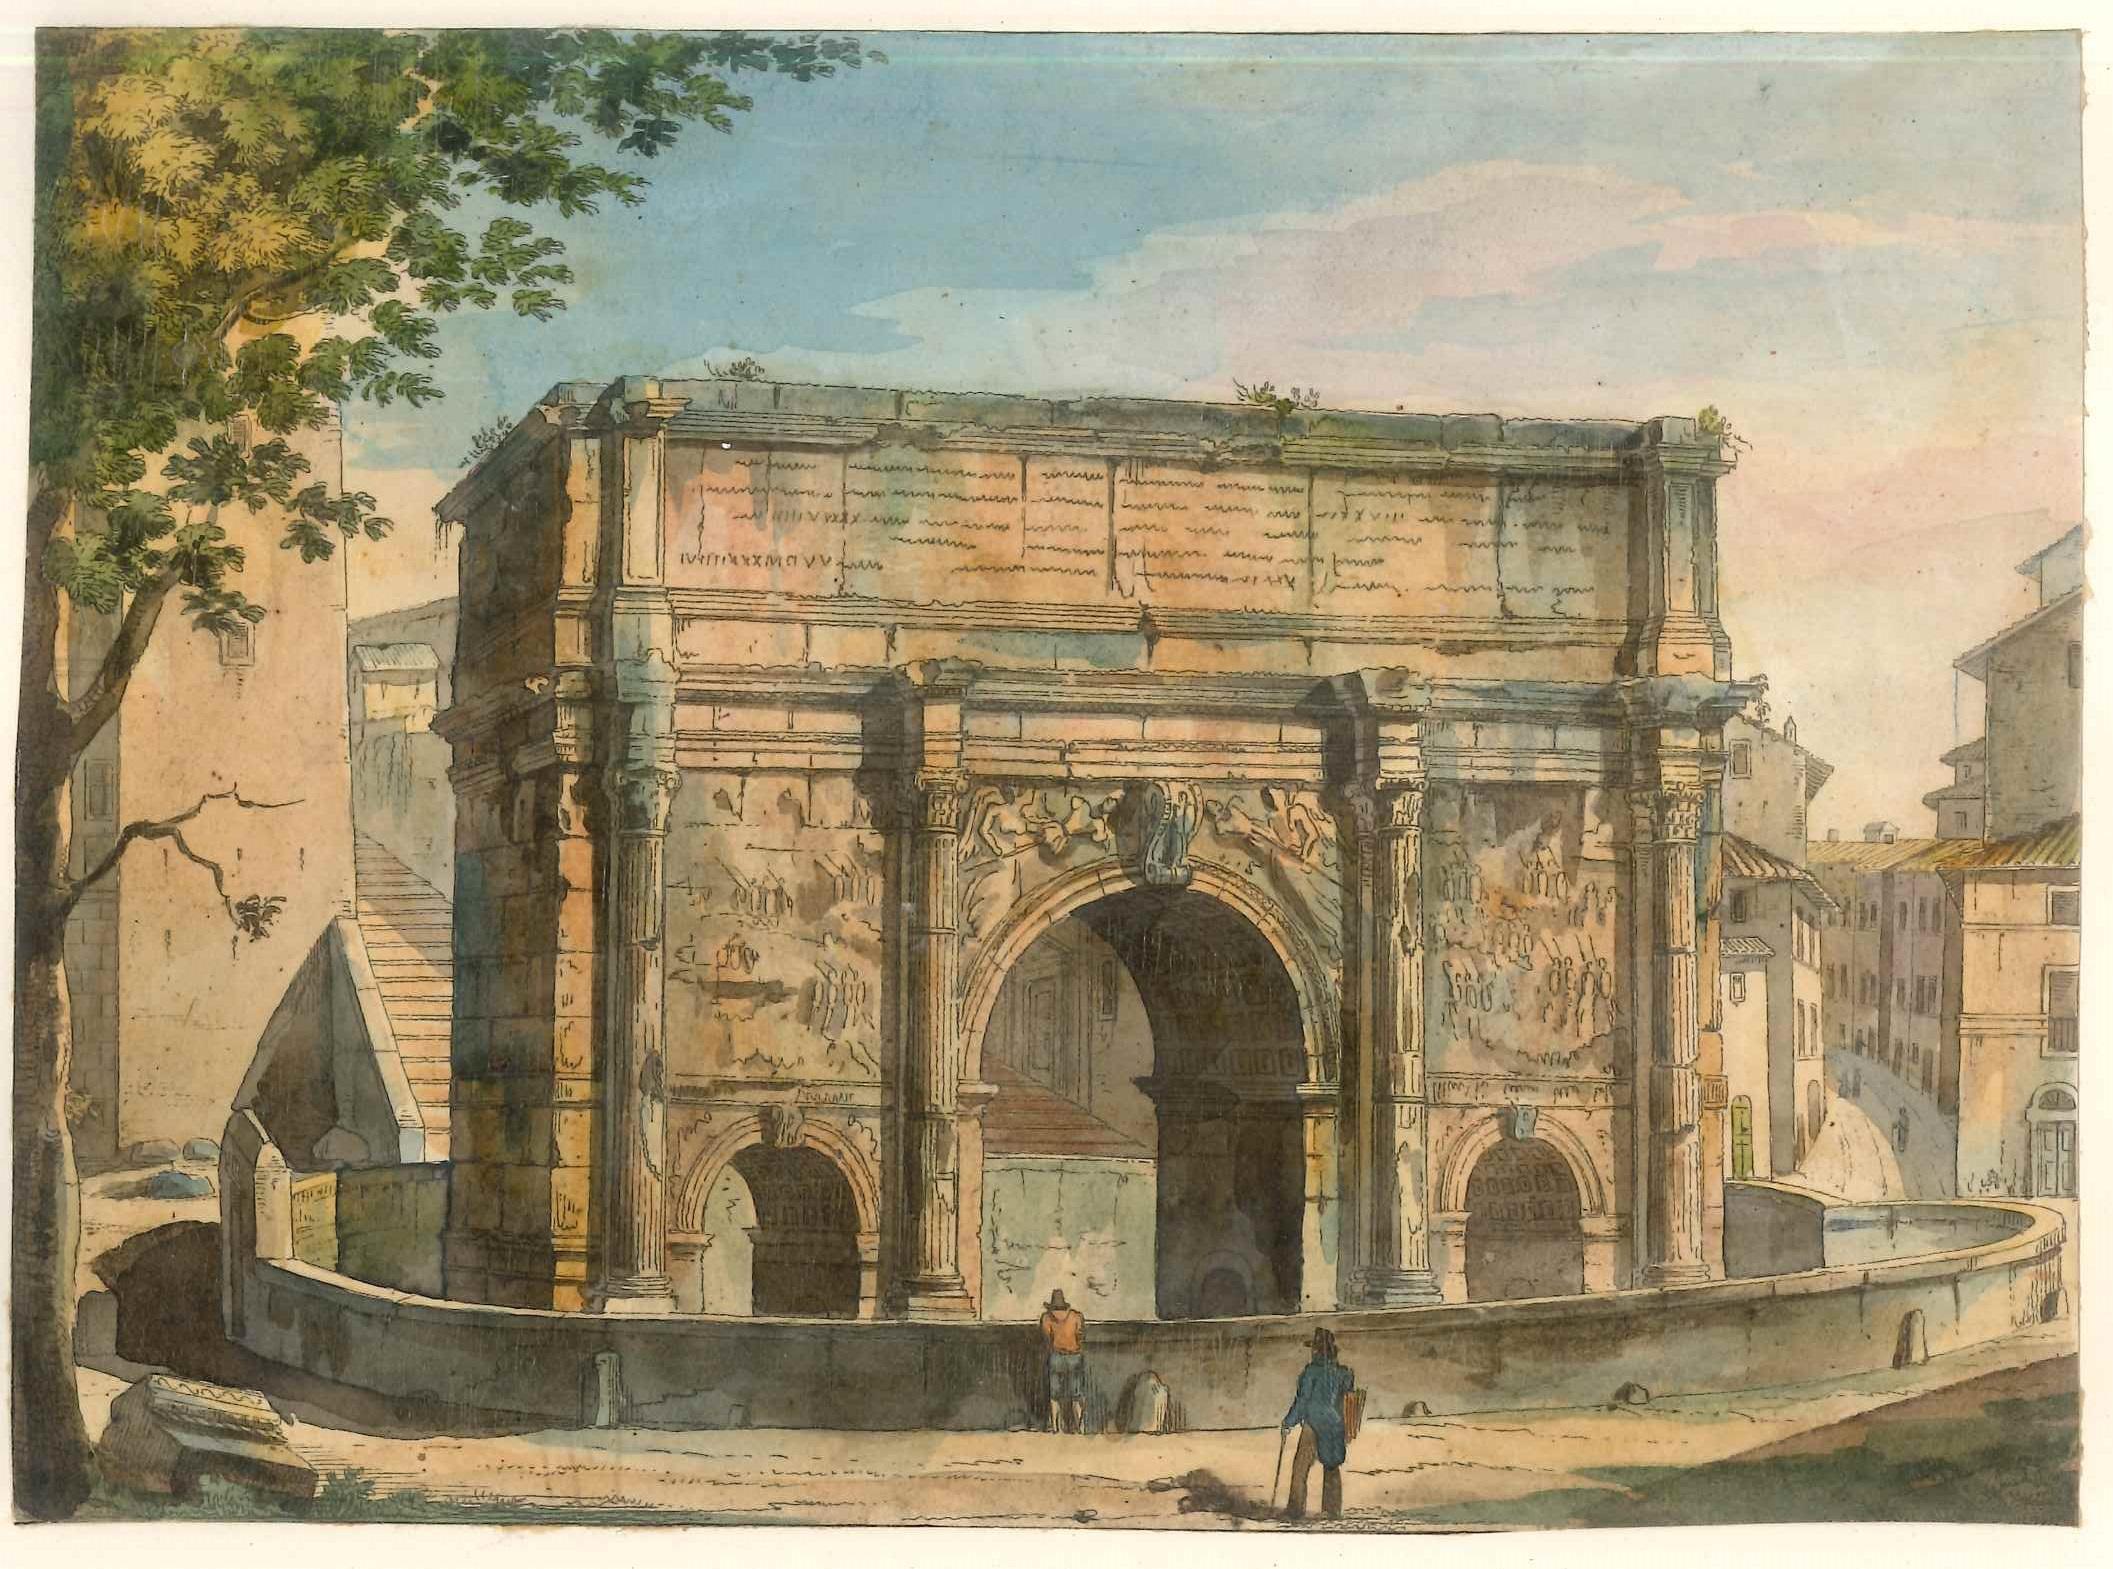 Triumphal Arches - Original Lithographs and Watercolors - Mid 19th Century - Print by Unknown